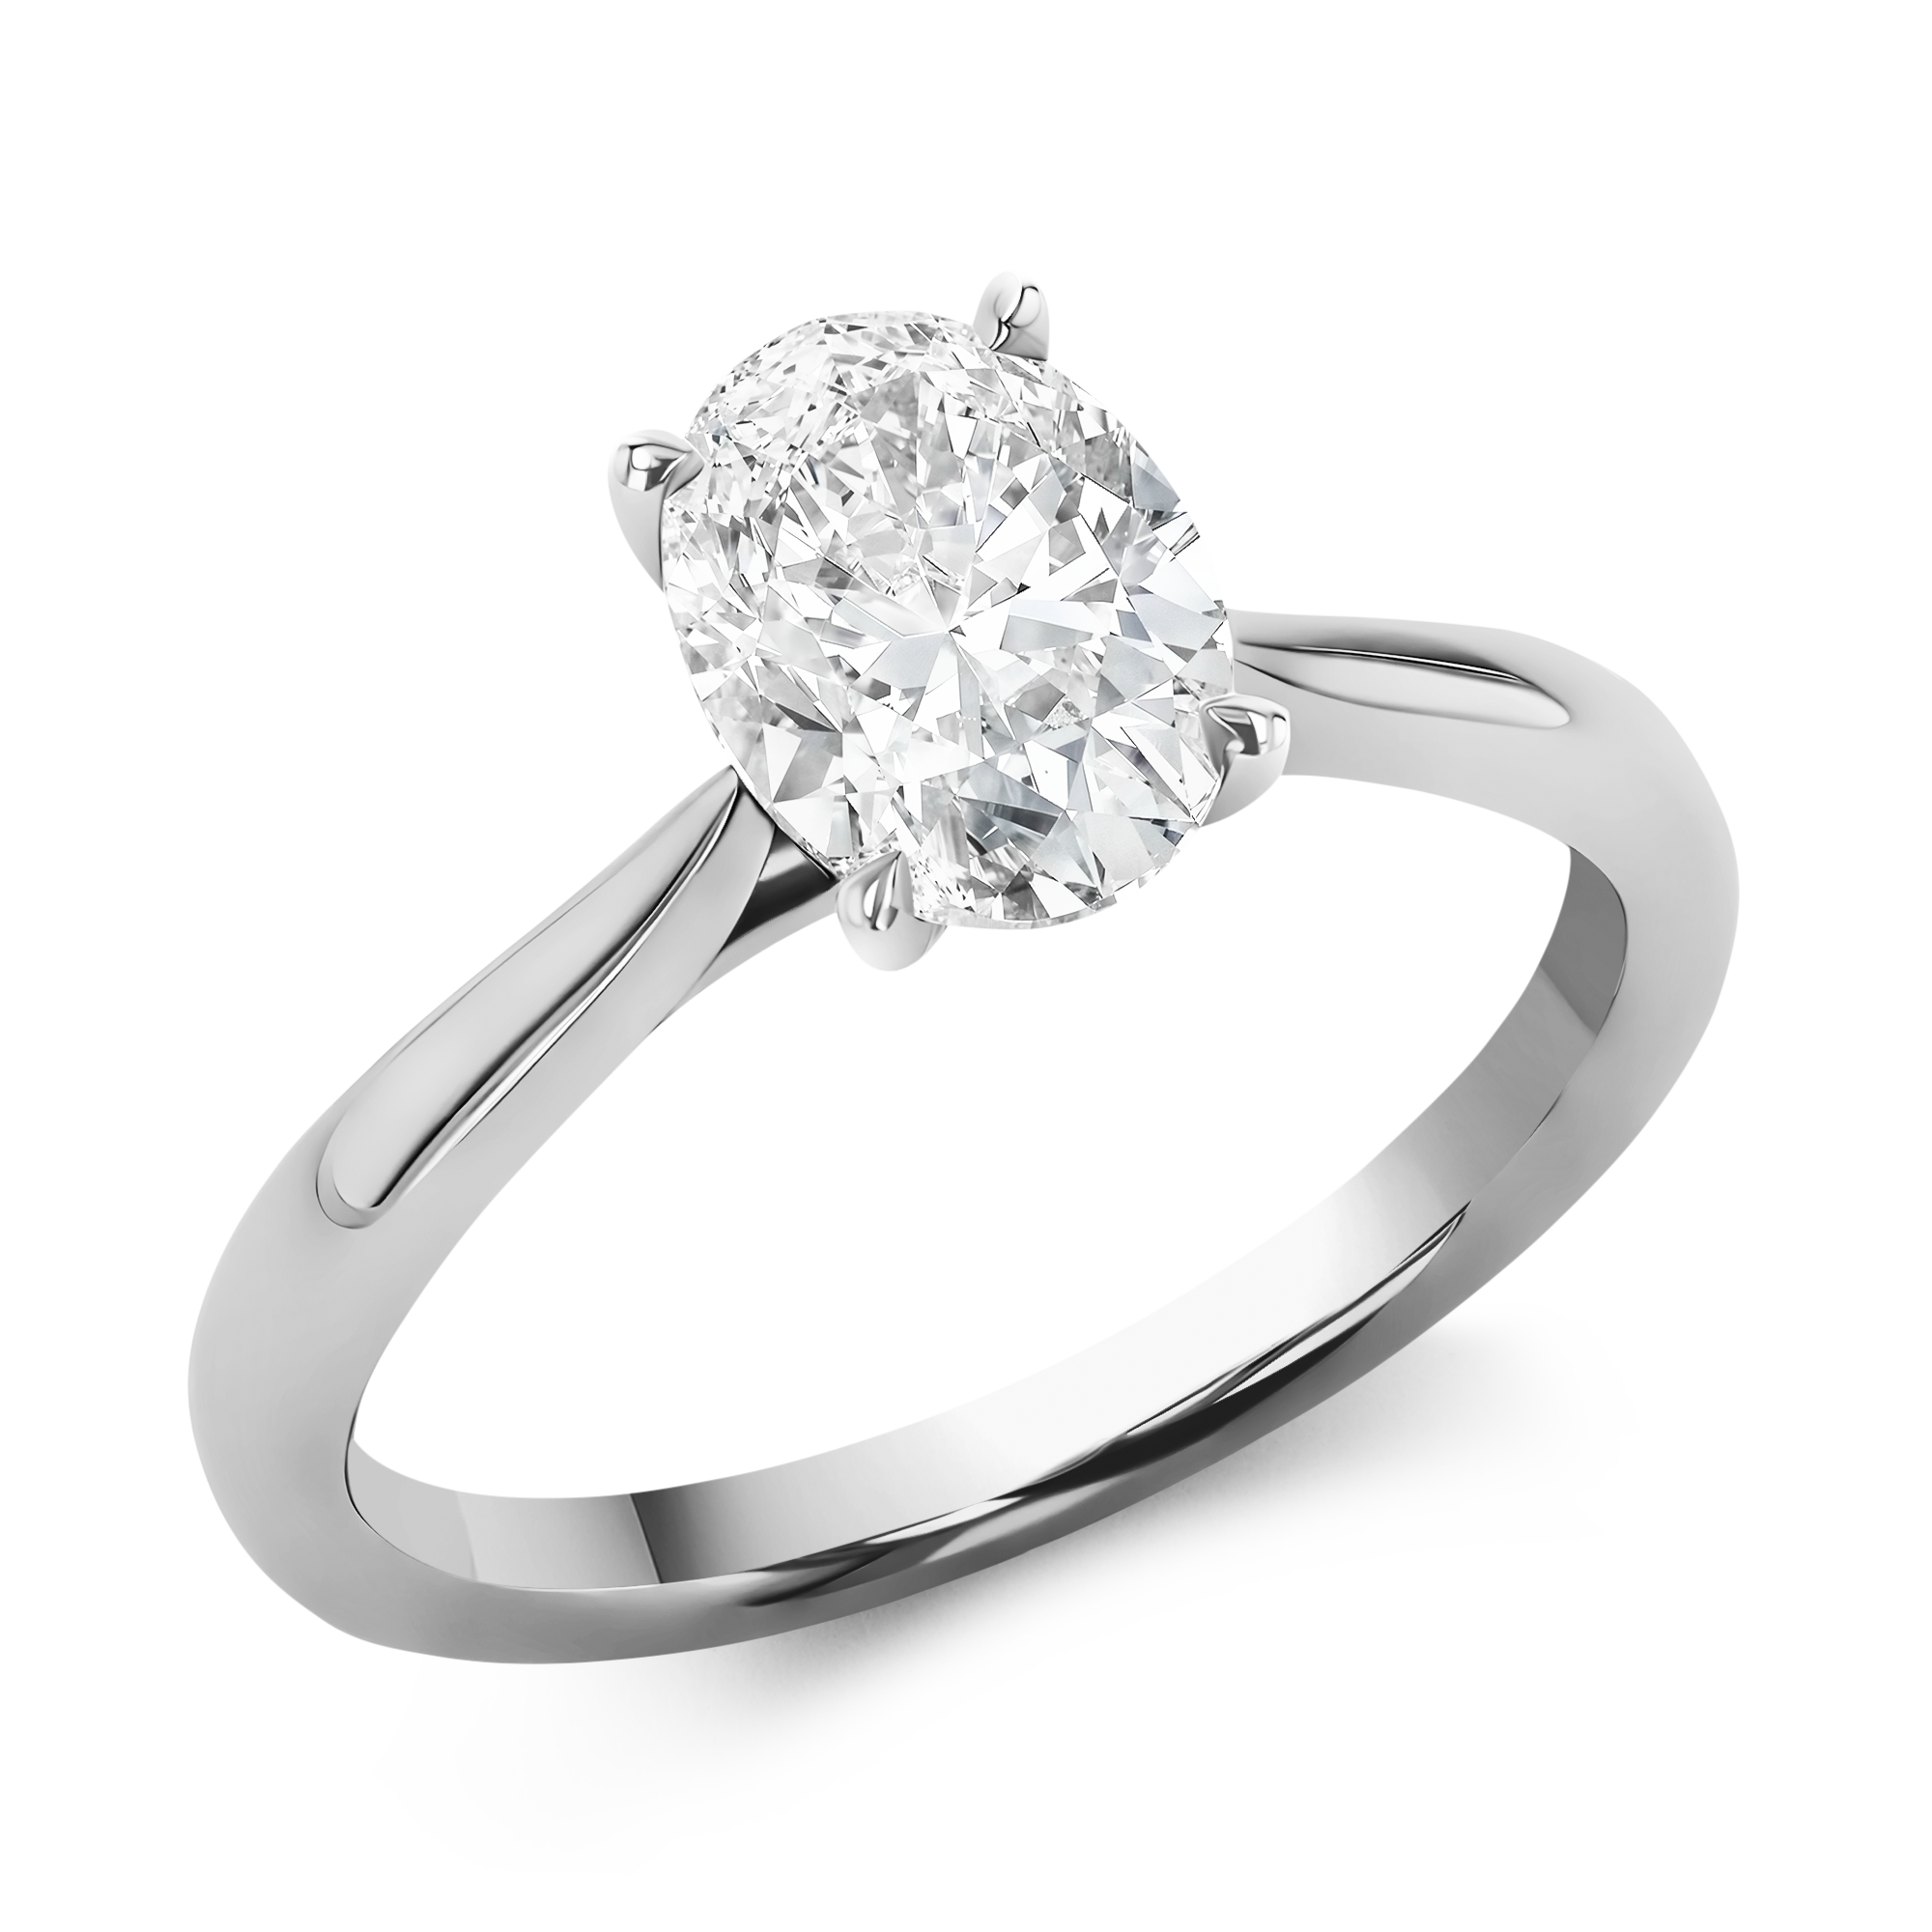 Gaia 1.50ct Diamond Solitaire Ring Oval Cut, Claw Set_1